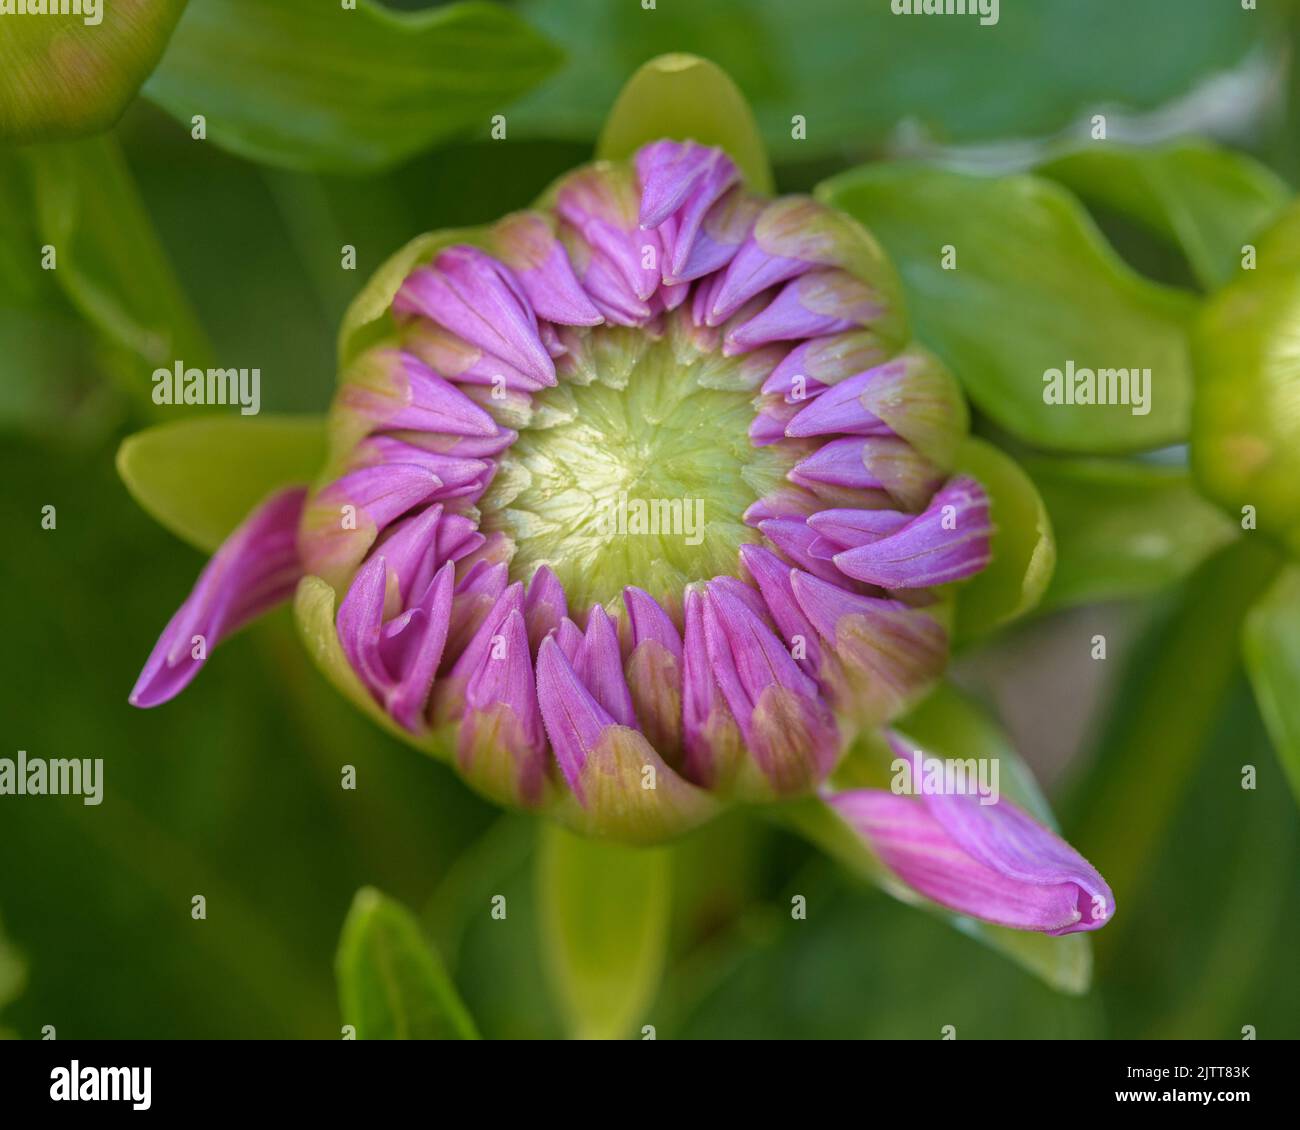 Budding Pink Soft Purple Dahlia Flower Close Up with Green Leaves Stock Photo